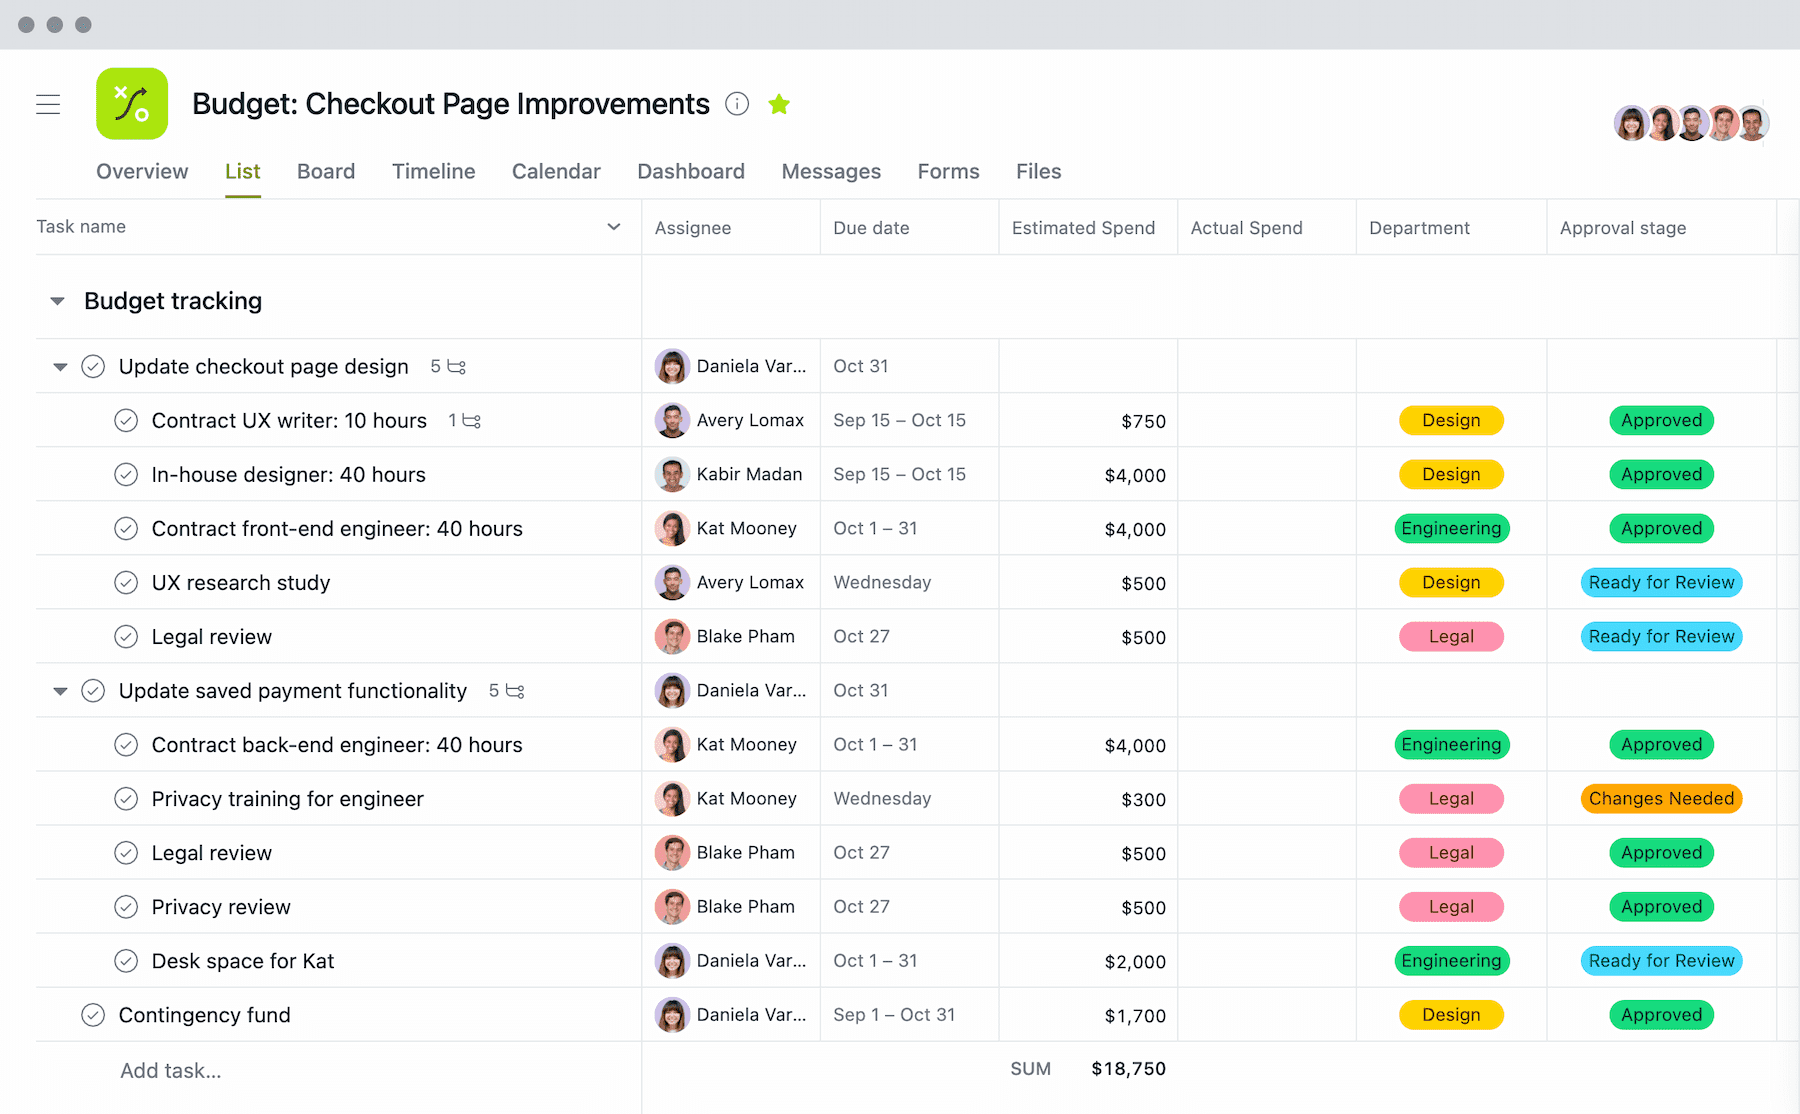 [Old Product UI] Project budget example (lists)